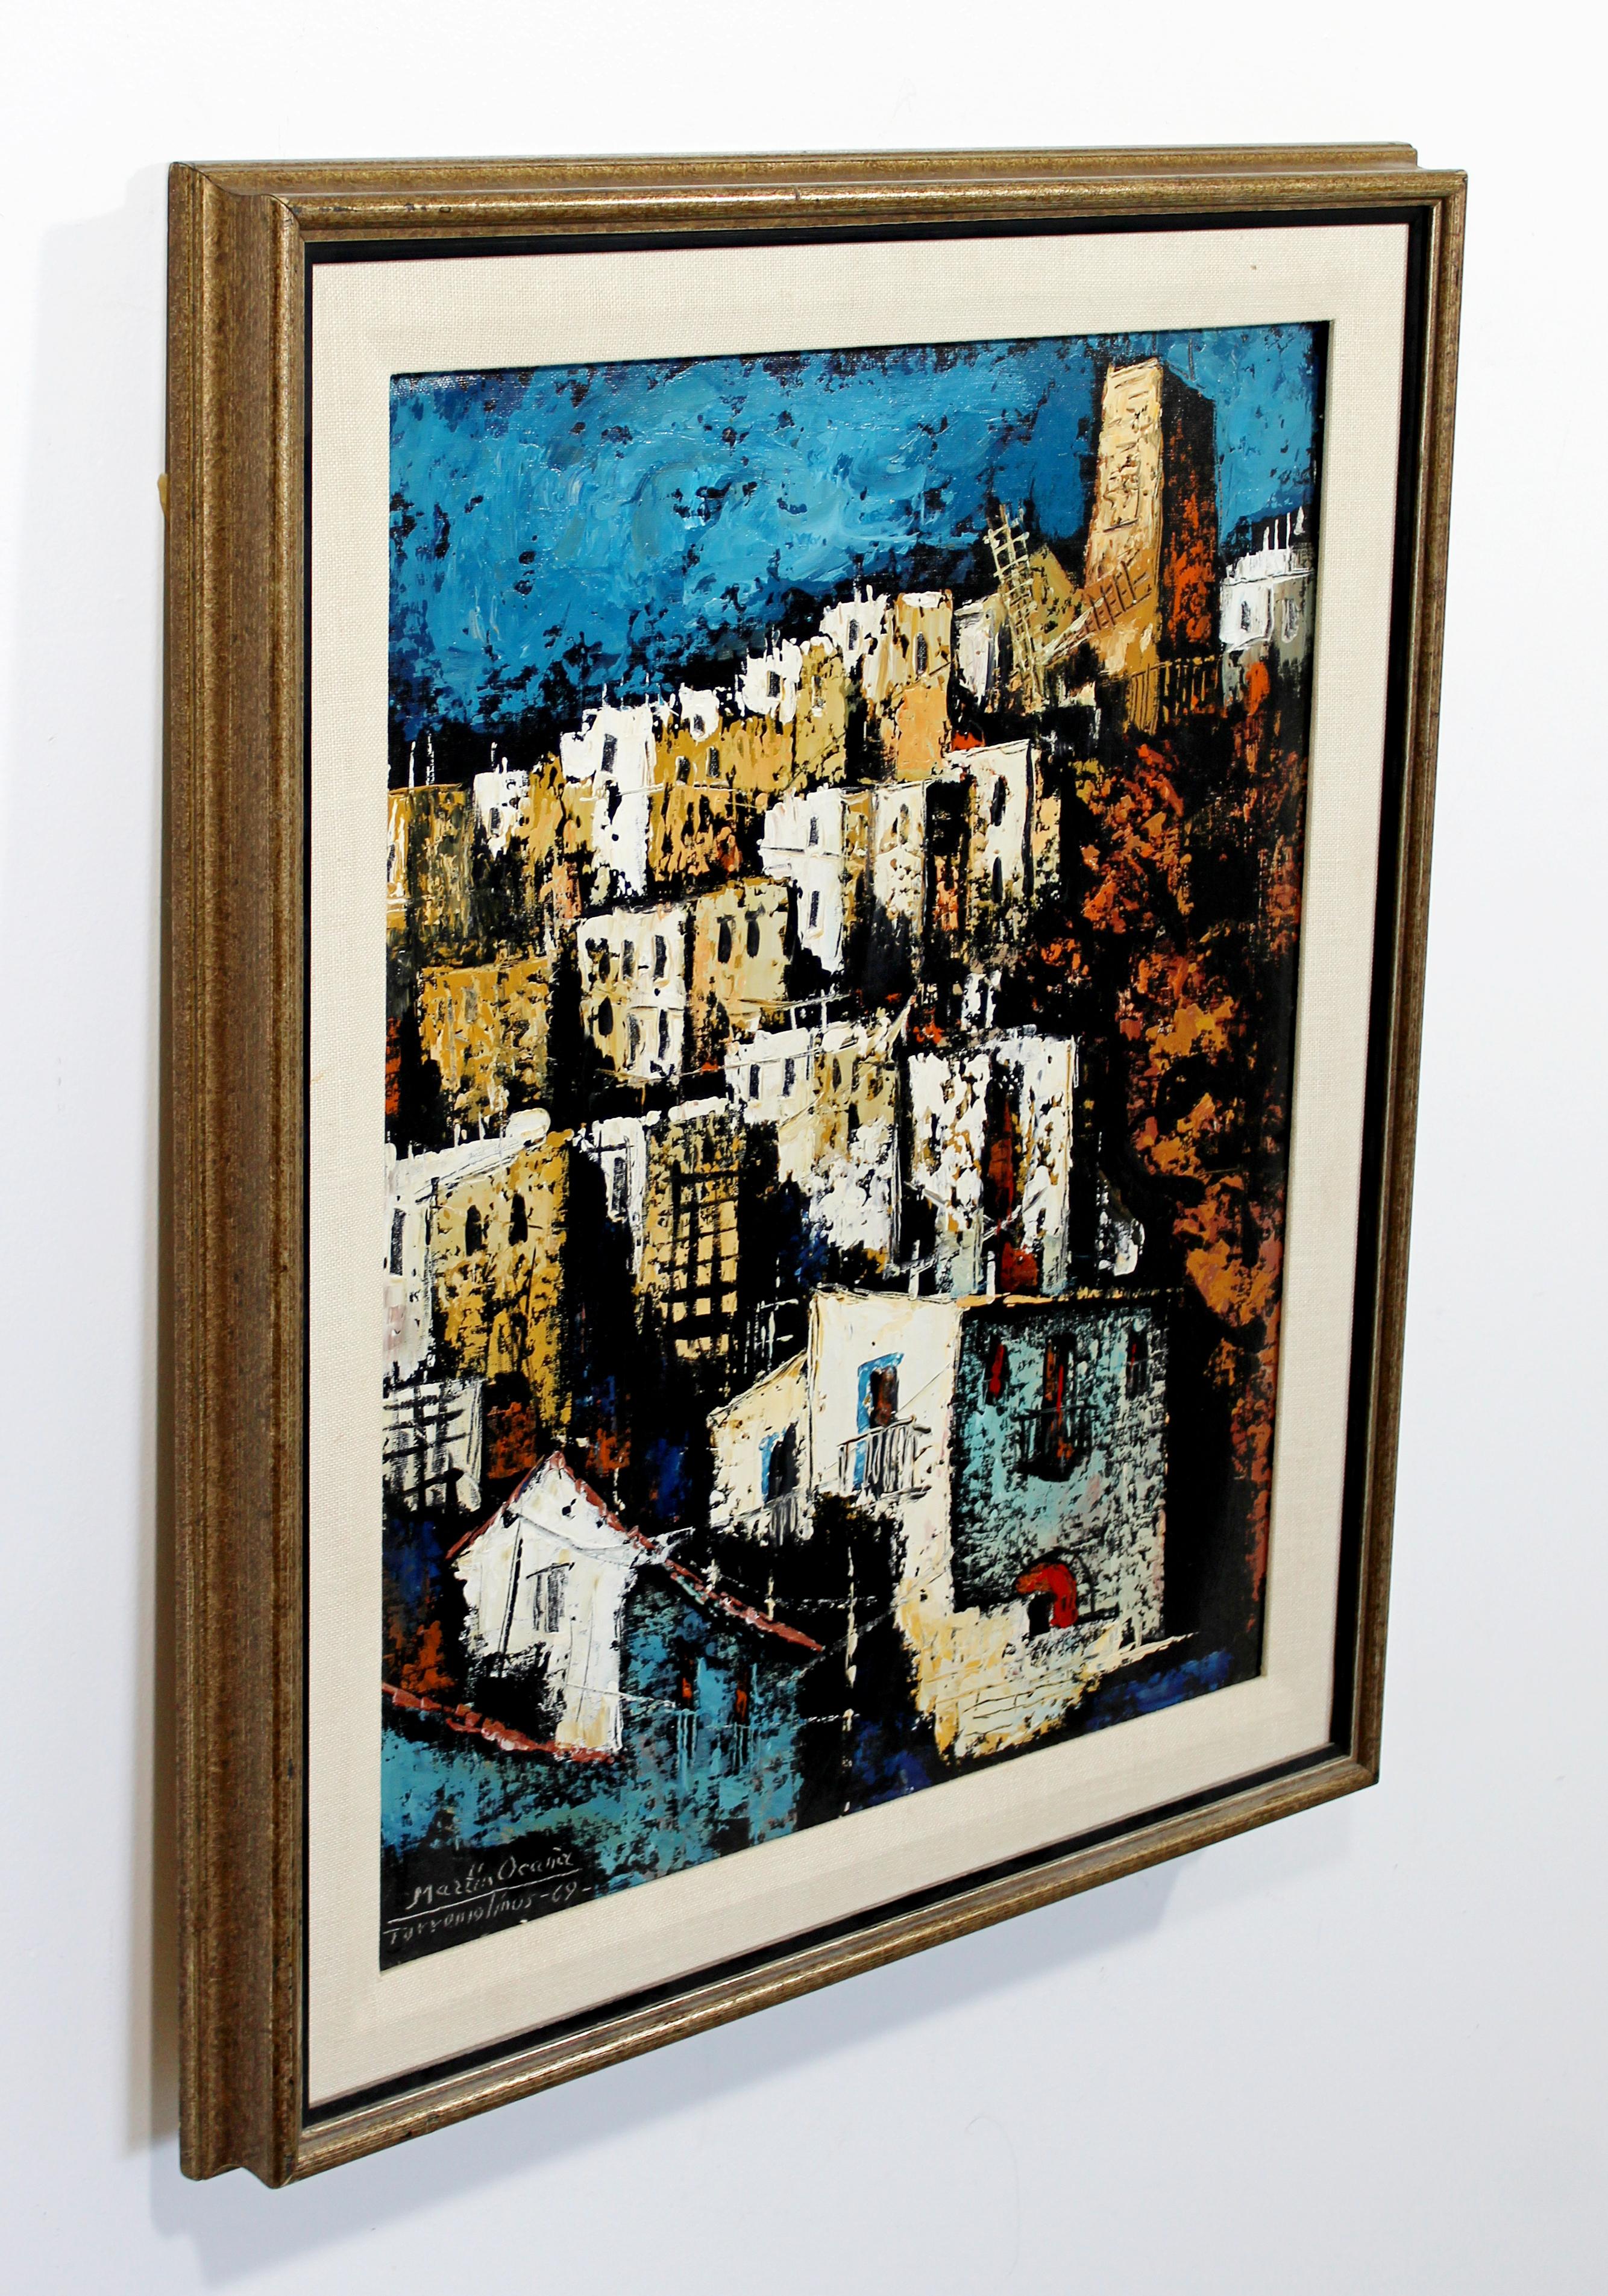 For your consideration is a fantastic, framed, oil on canvas painting, depicting a city scene, signed by Martin Ocanez, dated 1969. In excellent condition. The dimensions are 22.5